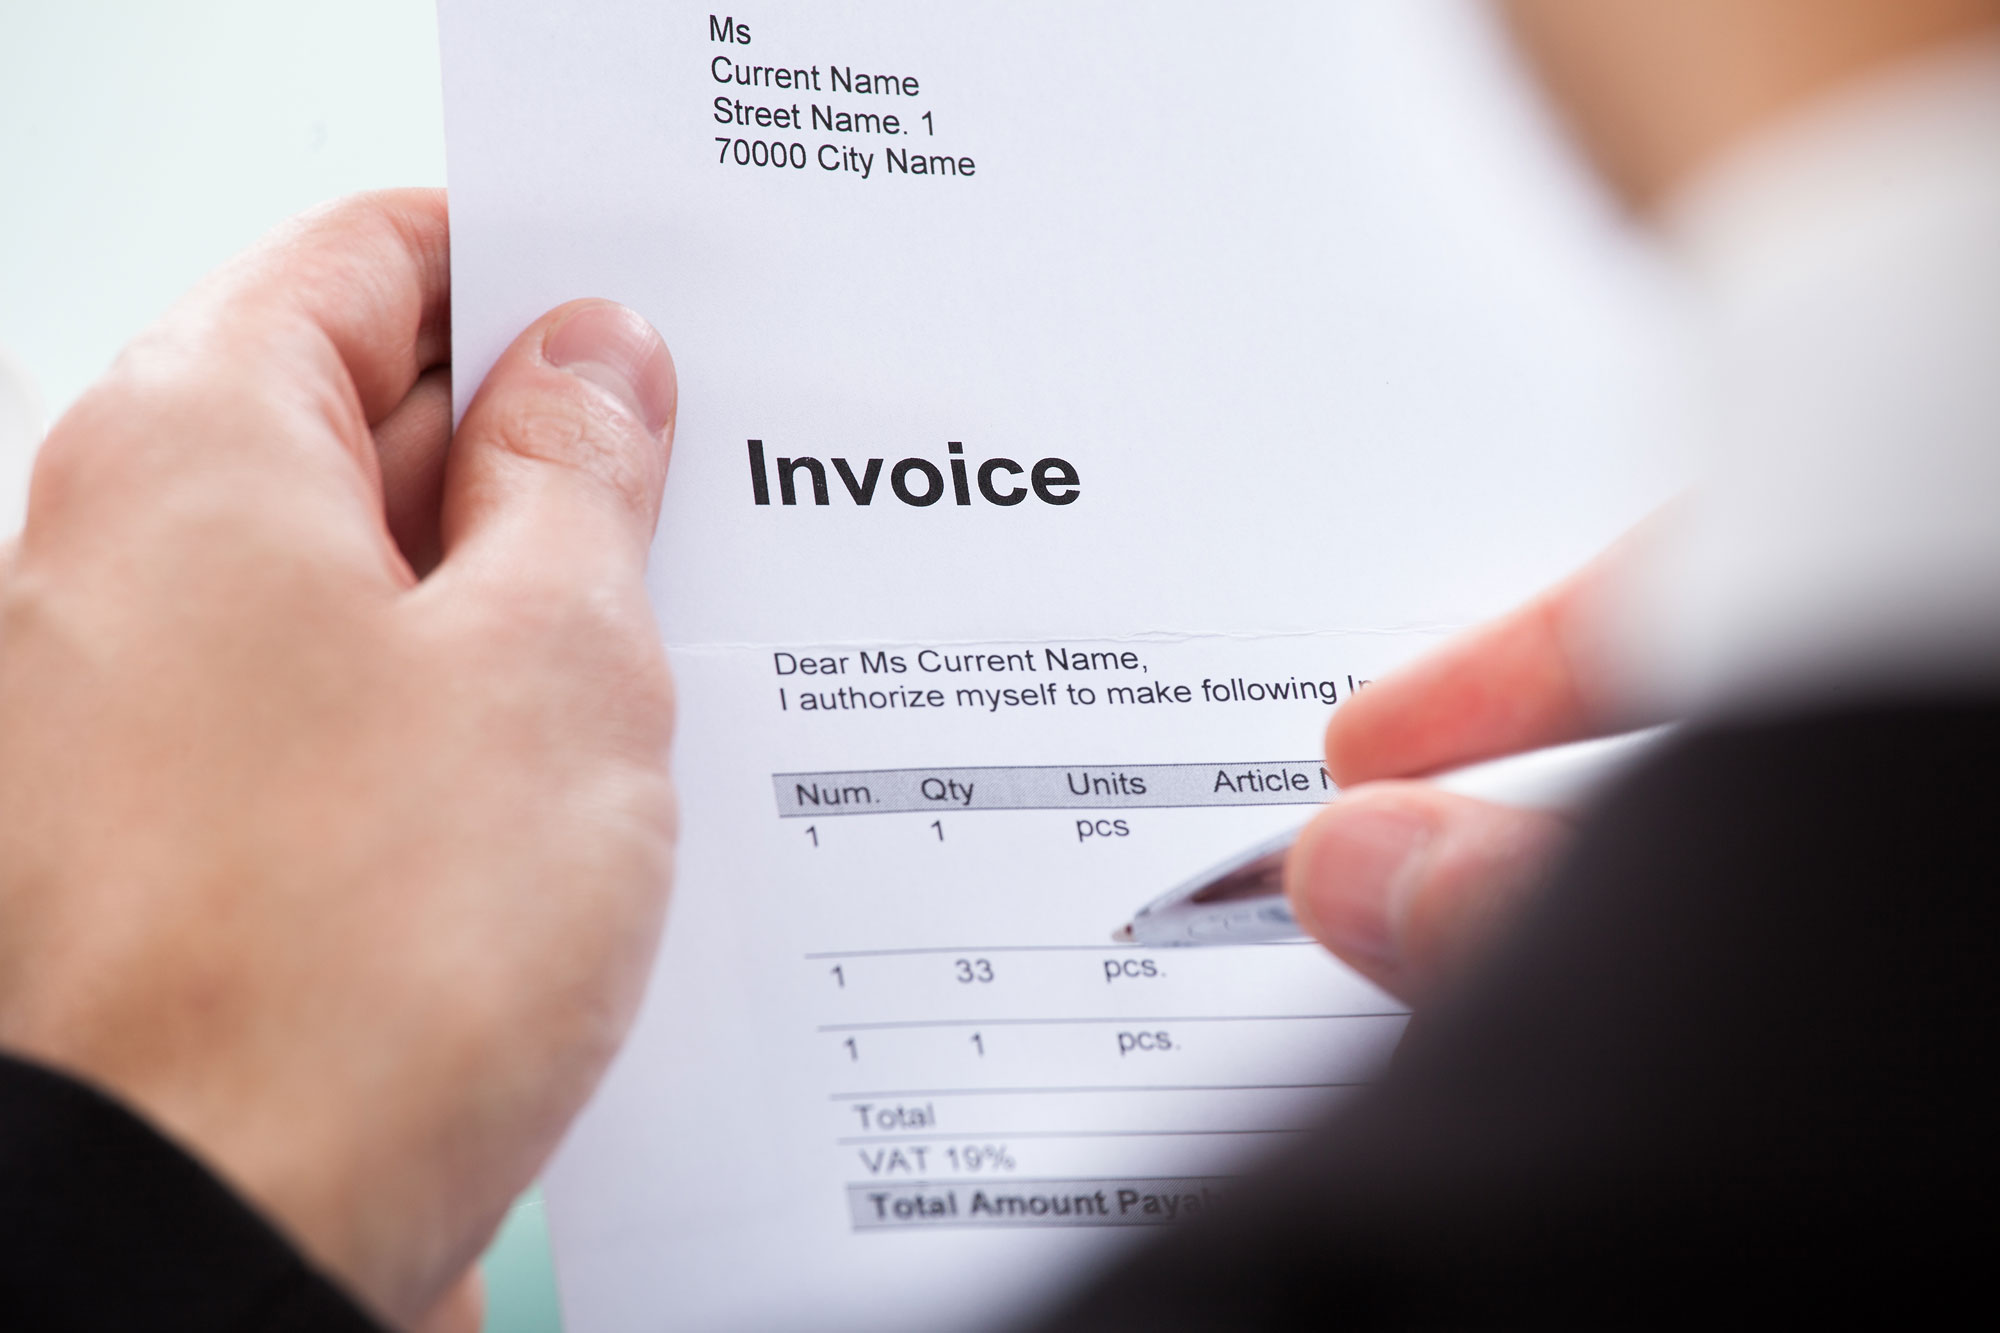 When to issue an invoice? (23)